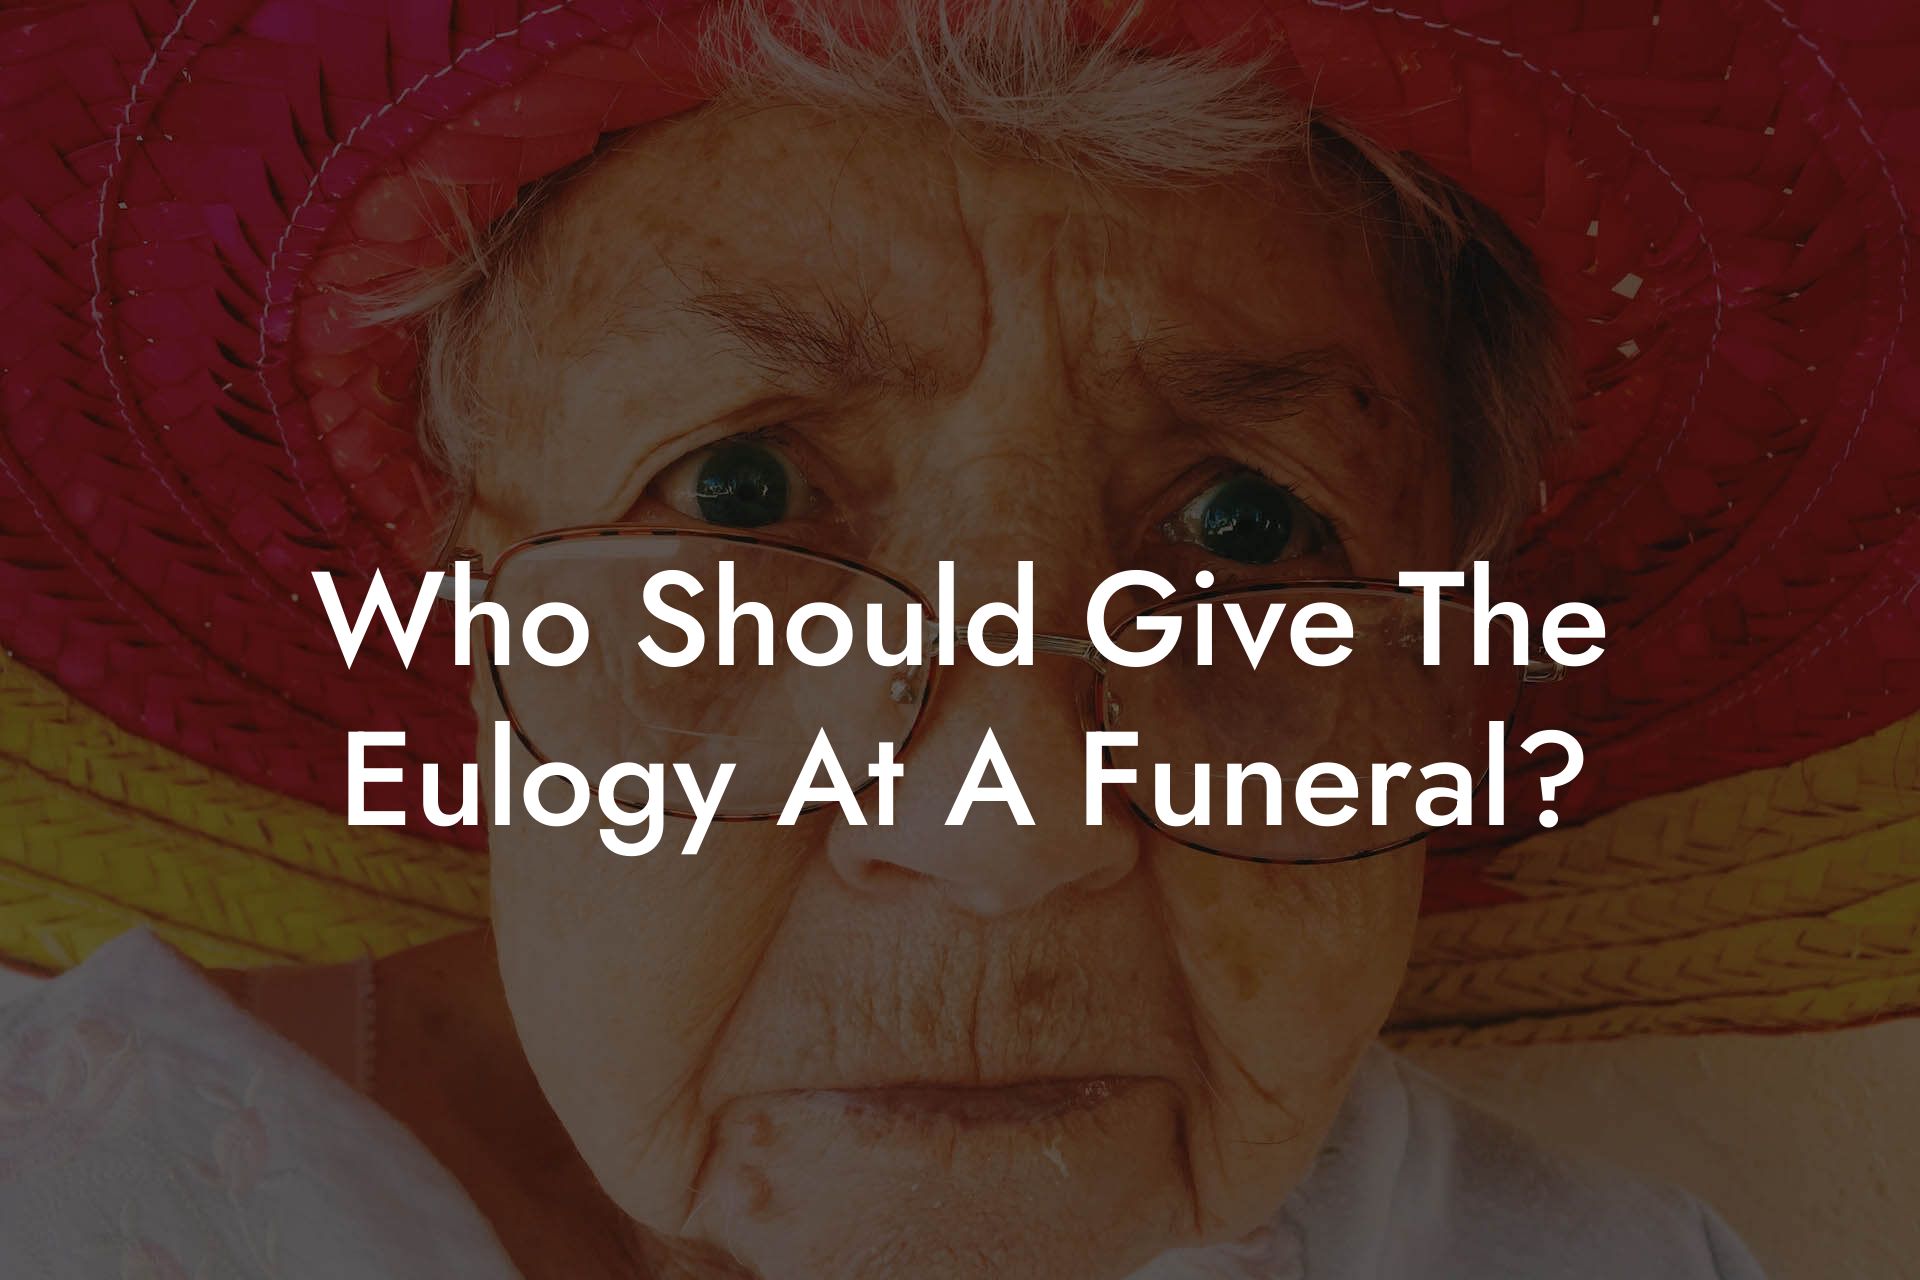 Who Should Give The Eulogy At A Funeral?